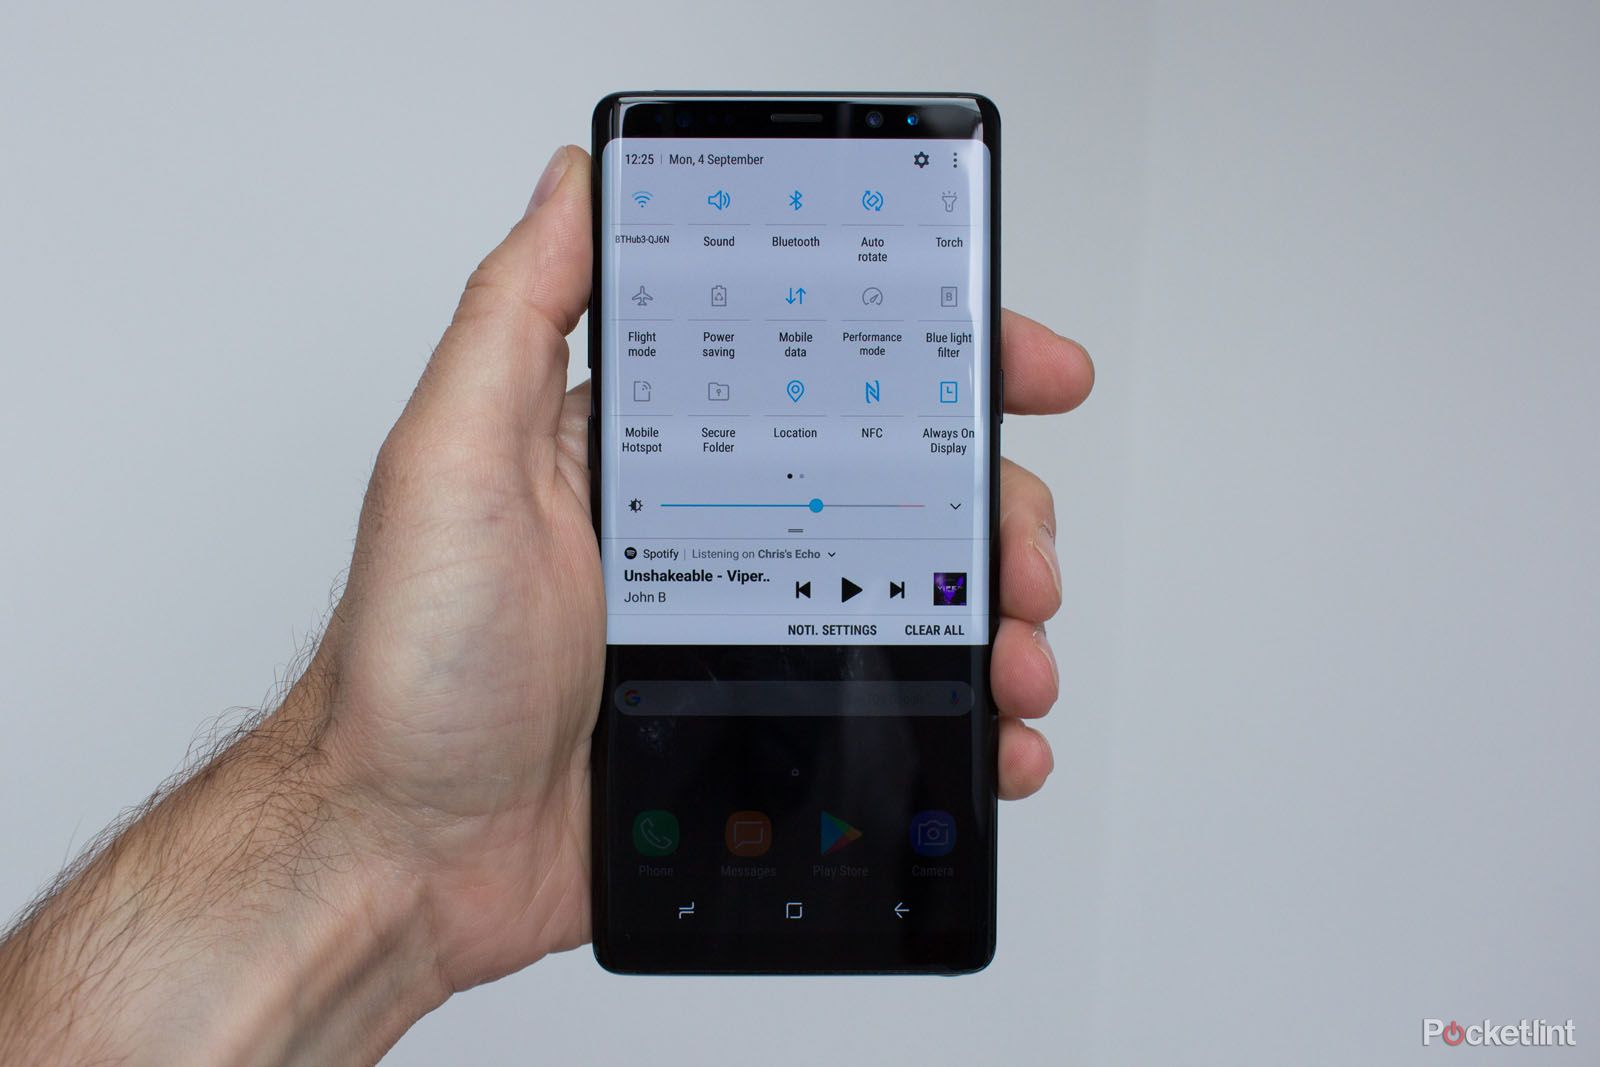 Samsung Galaxy Note 8 Tips And Tricks image 6